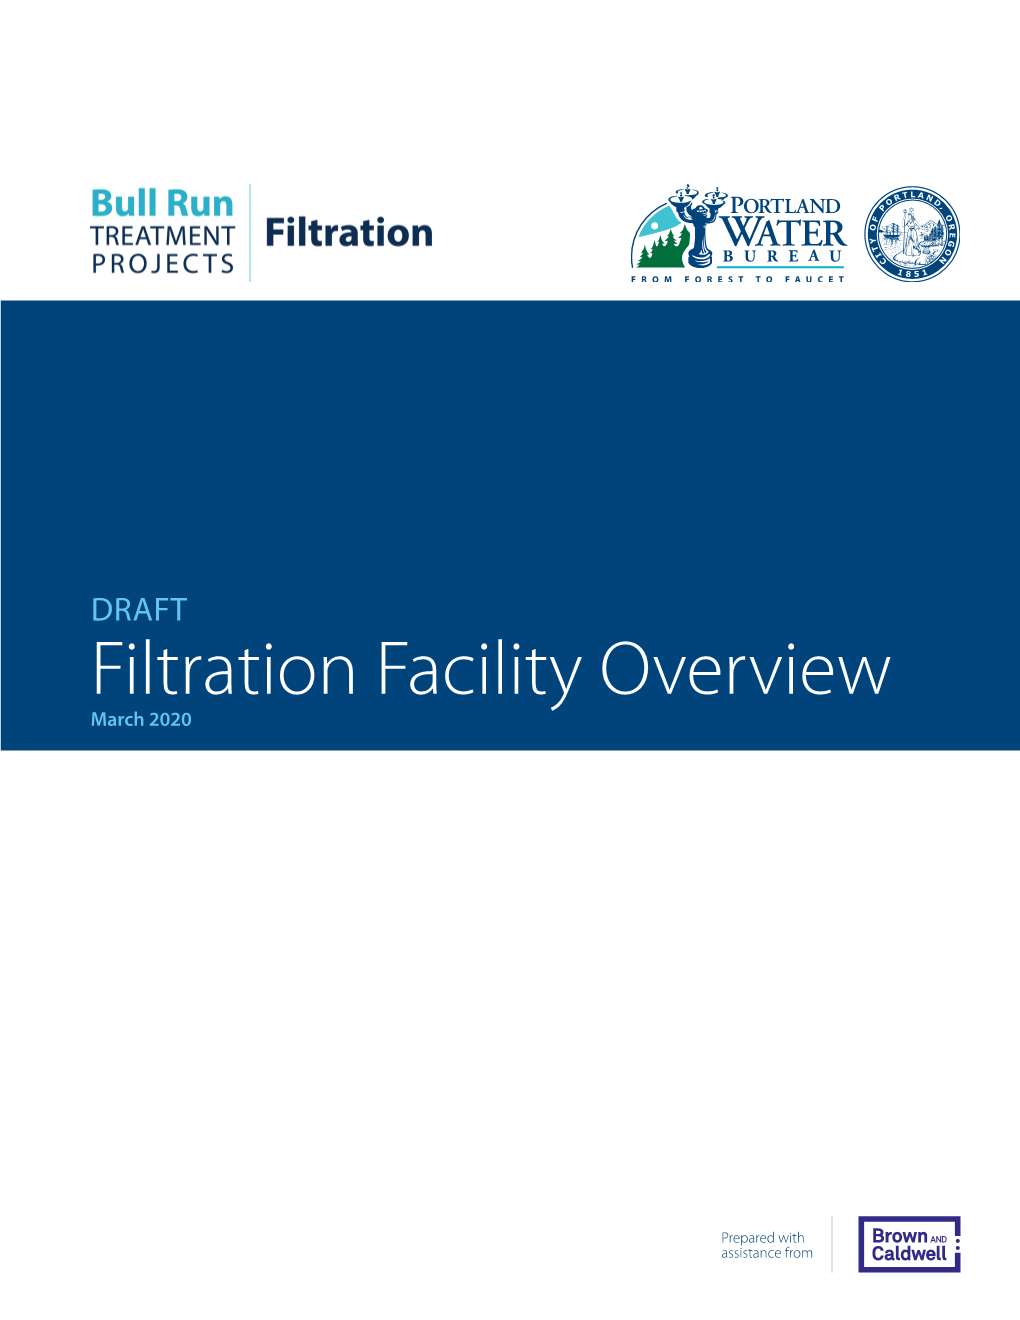 DRAFT Filtration Facility Overview March 2020